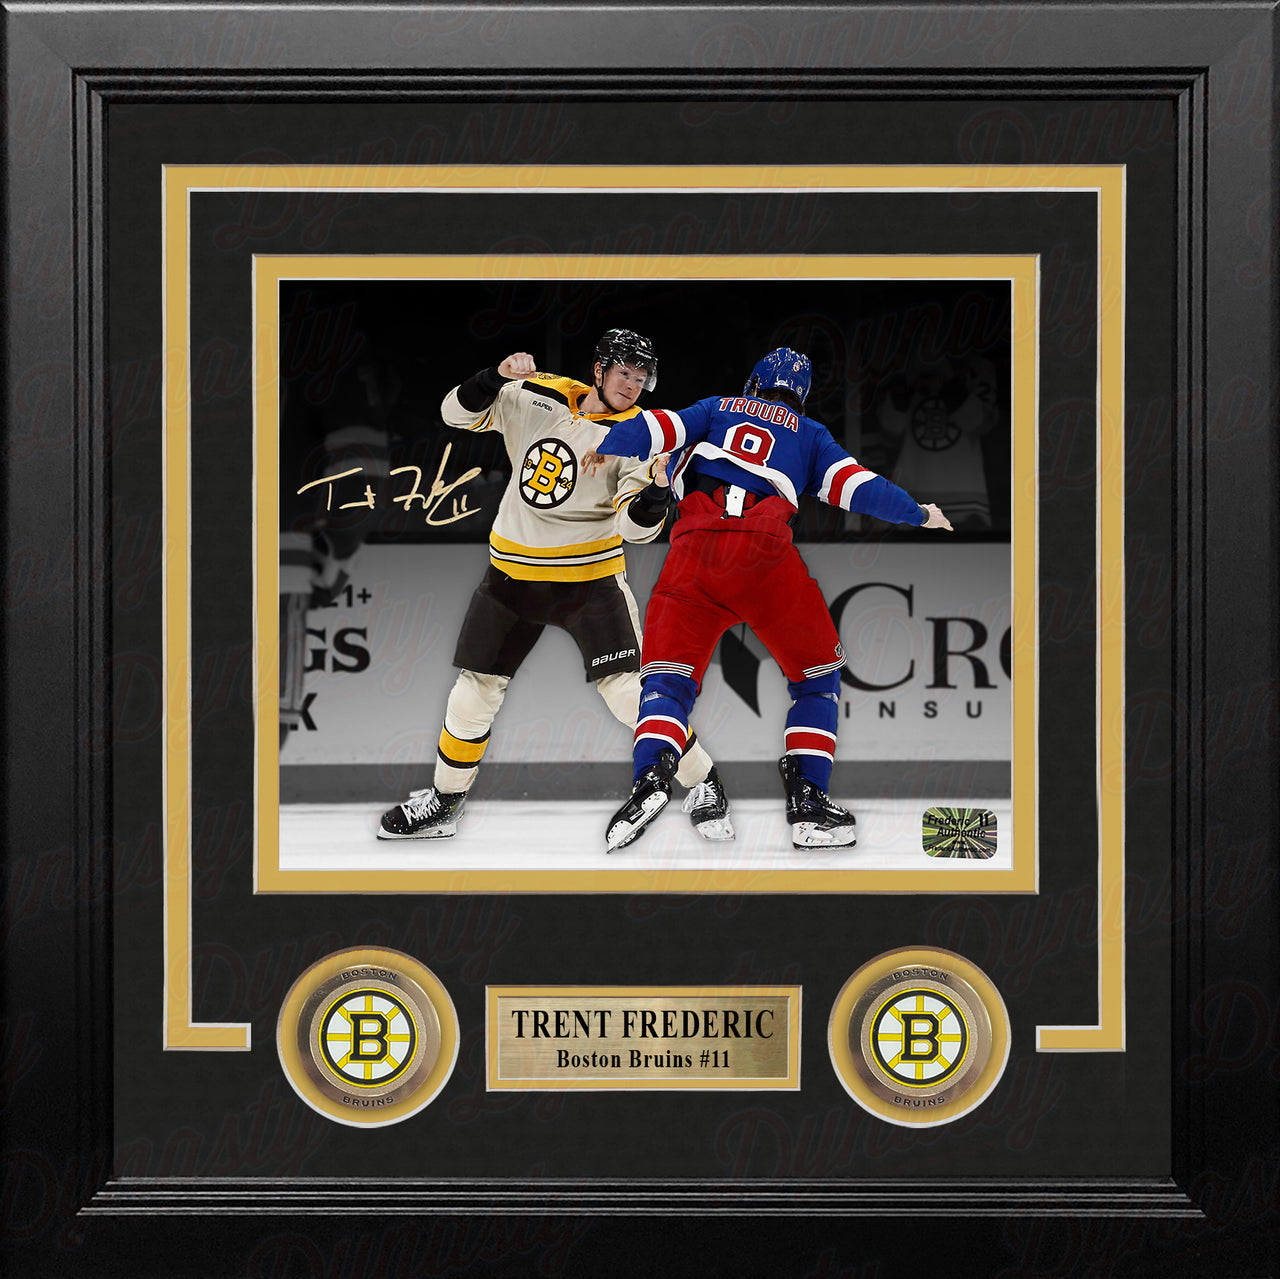 Trent Frederic Fighting Action Boston Bruins Autographed 8" x 10" Framed Hockey Photo